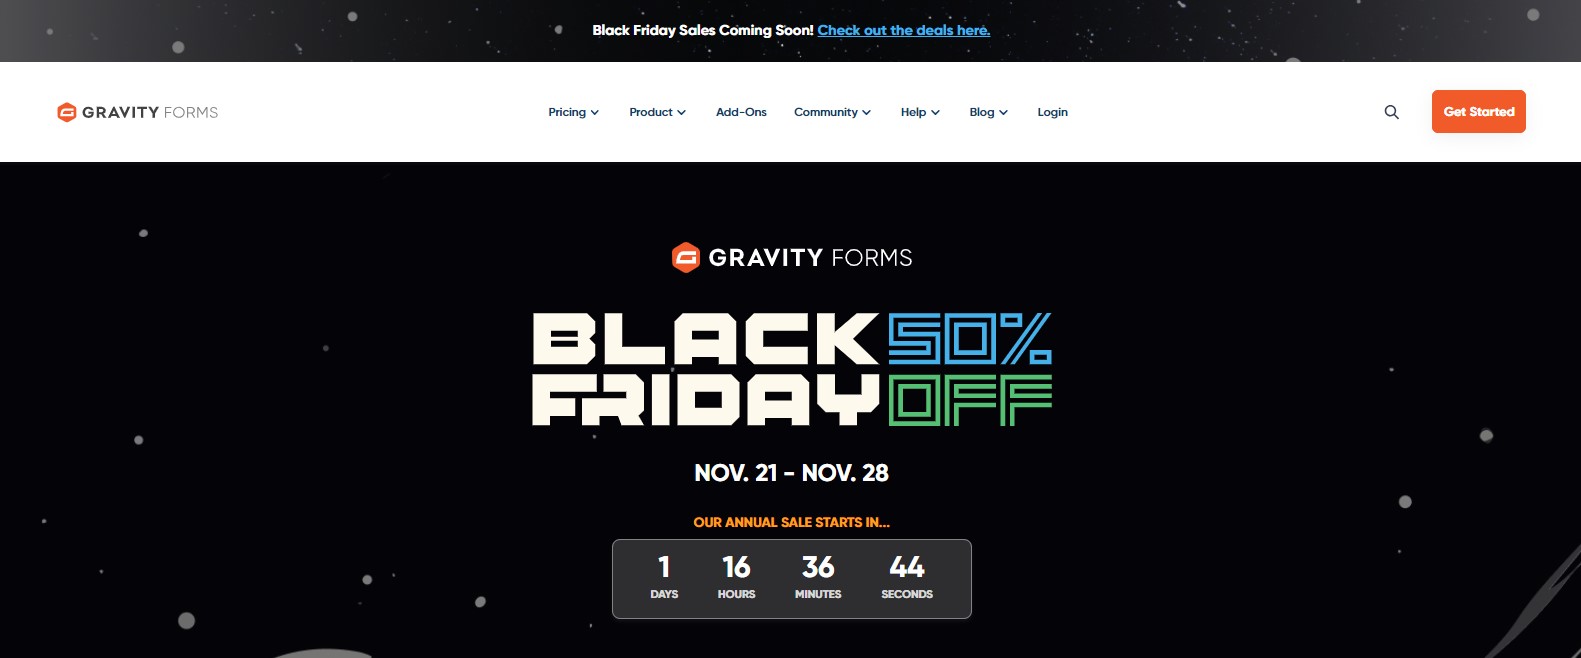 Gravity Forms Black Friday Deals